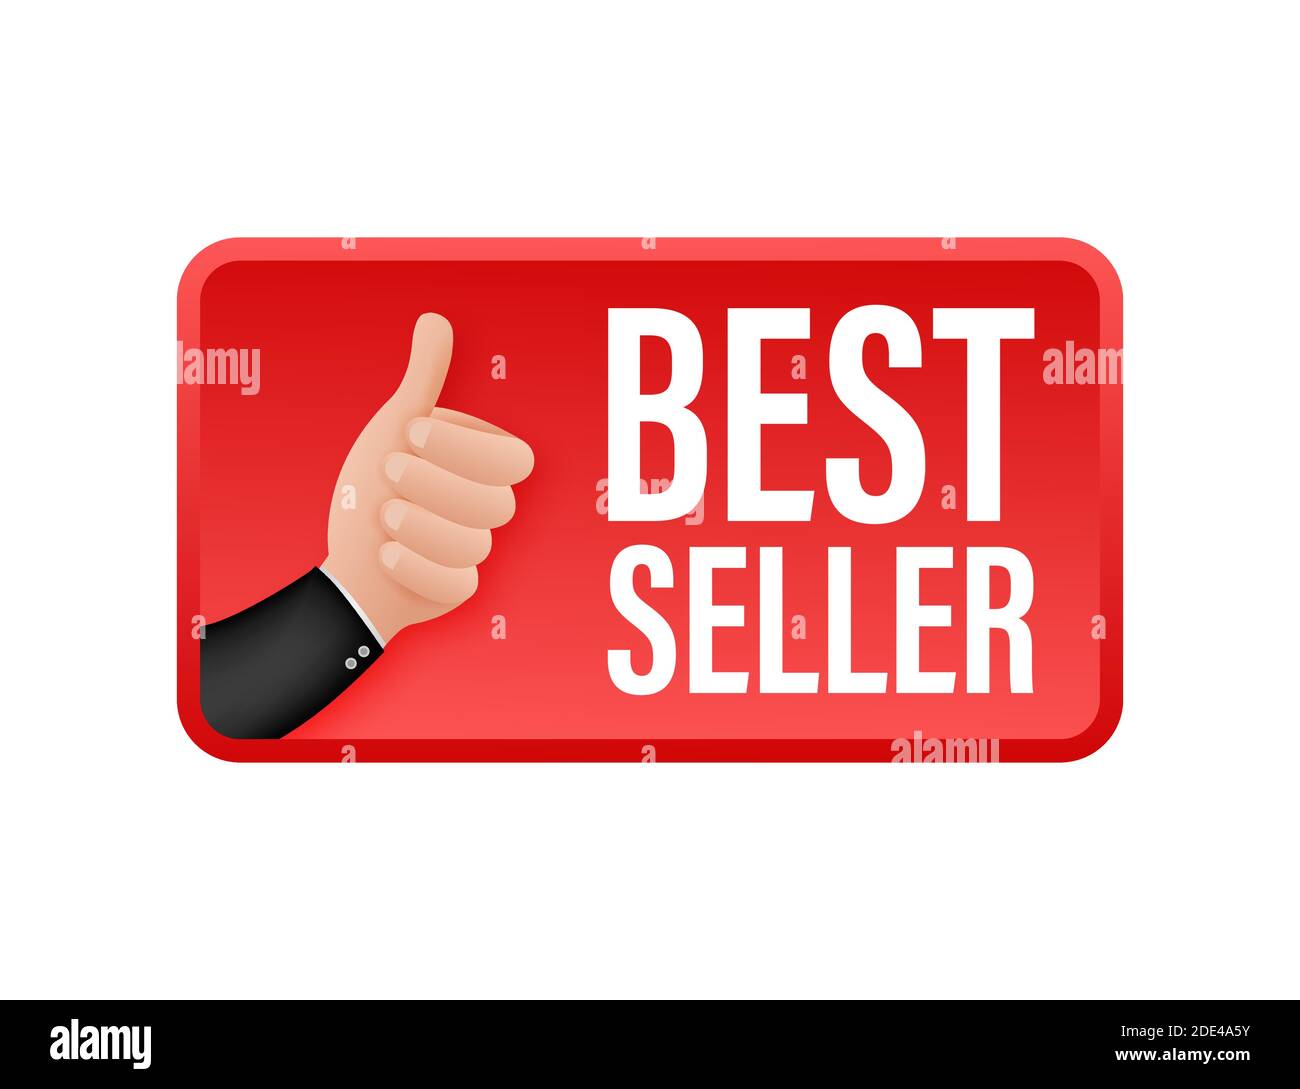 Good seller Stock Vector Images - Alamy